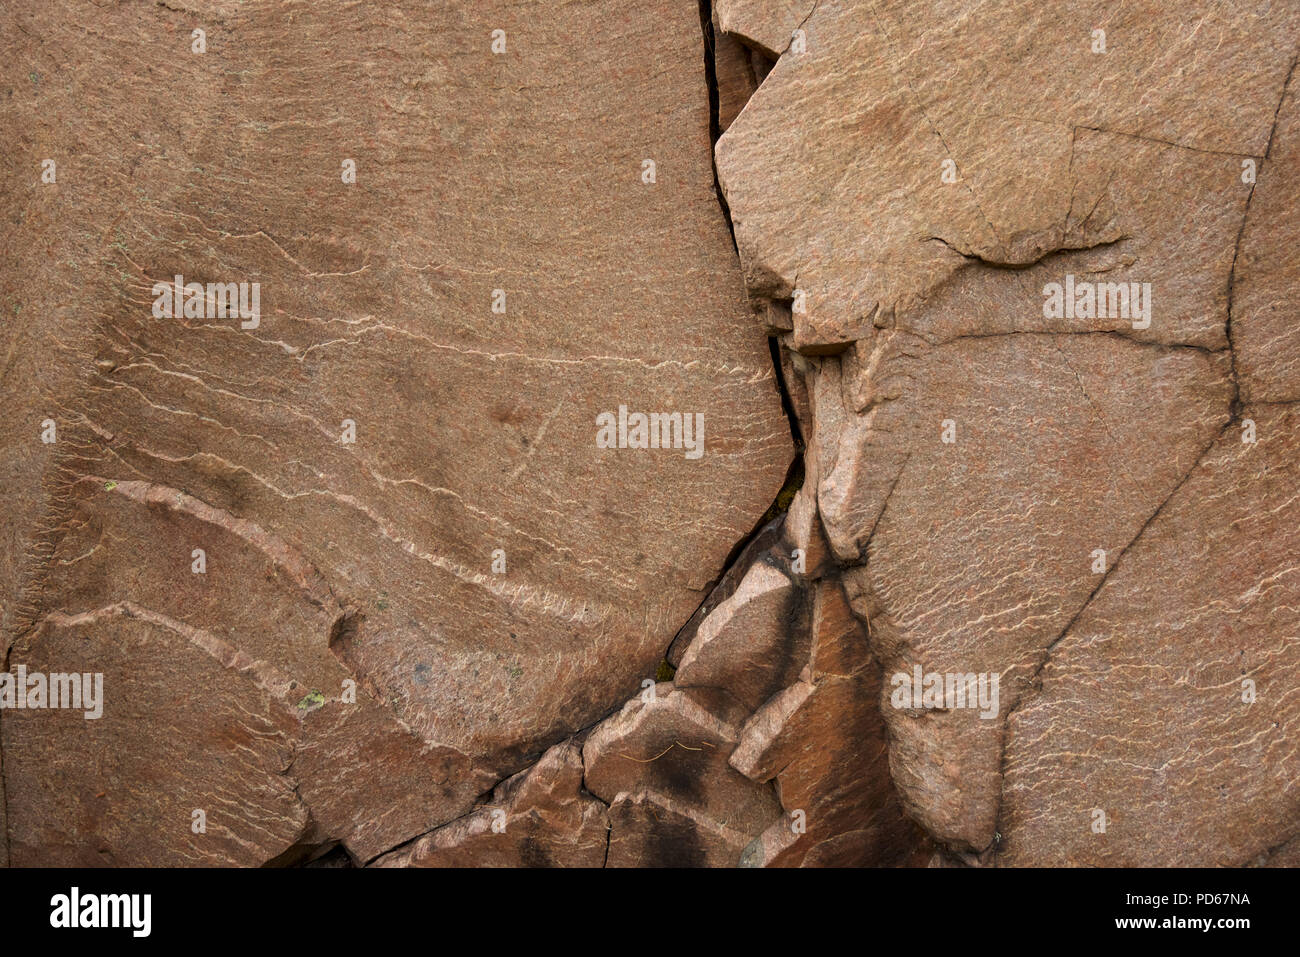 Pink granite of the Canadian Shield, typical of the bedrock in Killarney Park, Ontario. Stock Photo